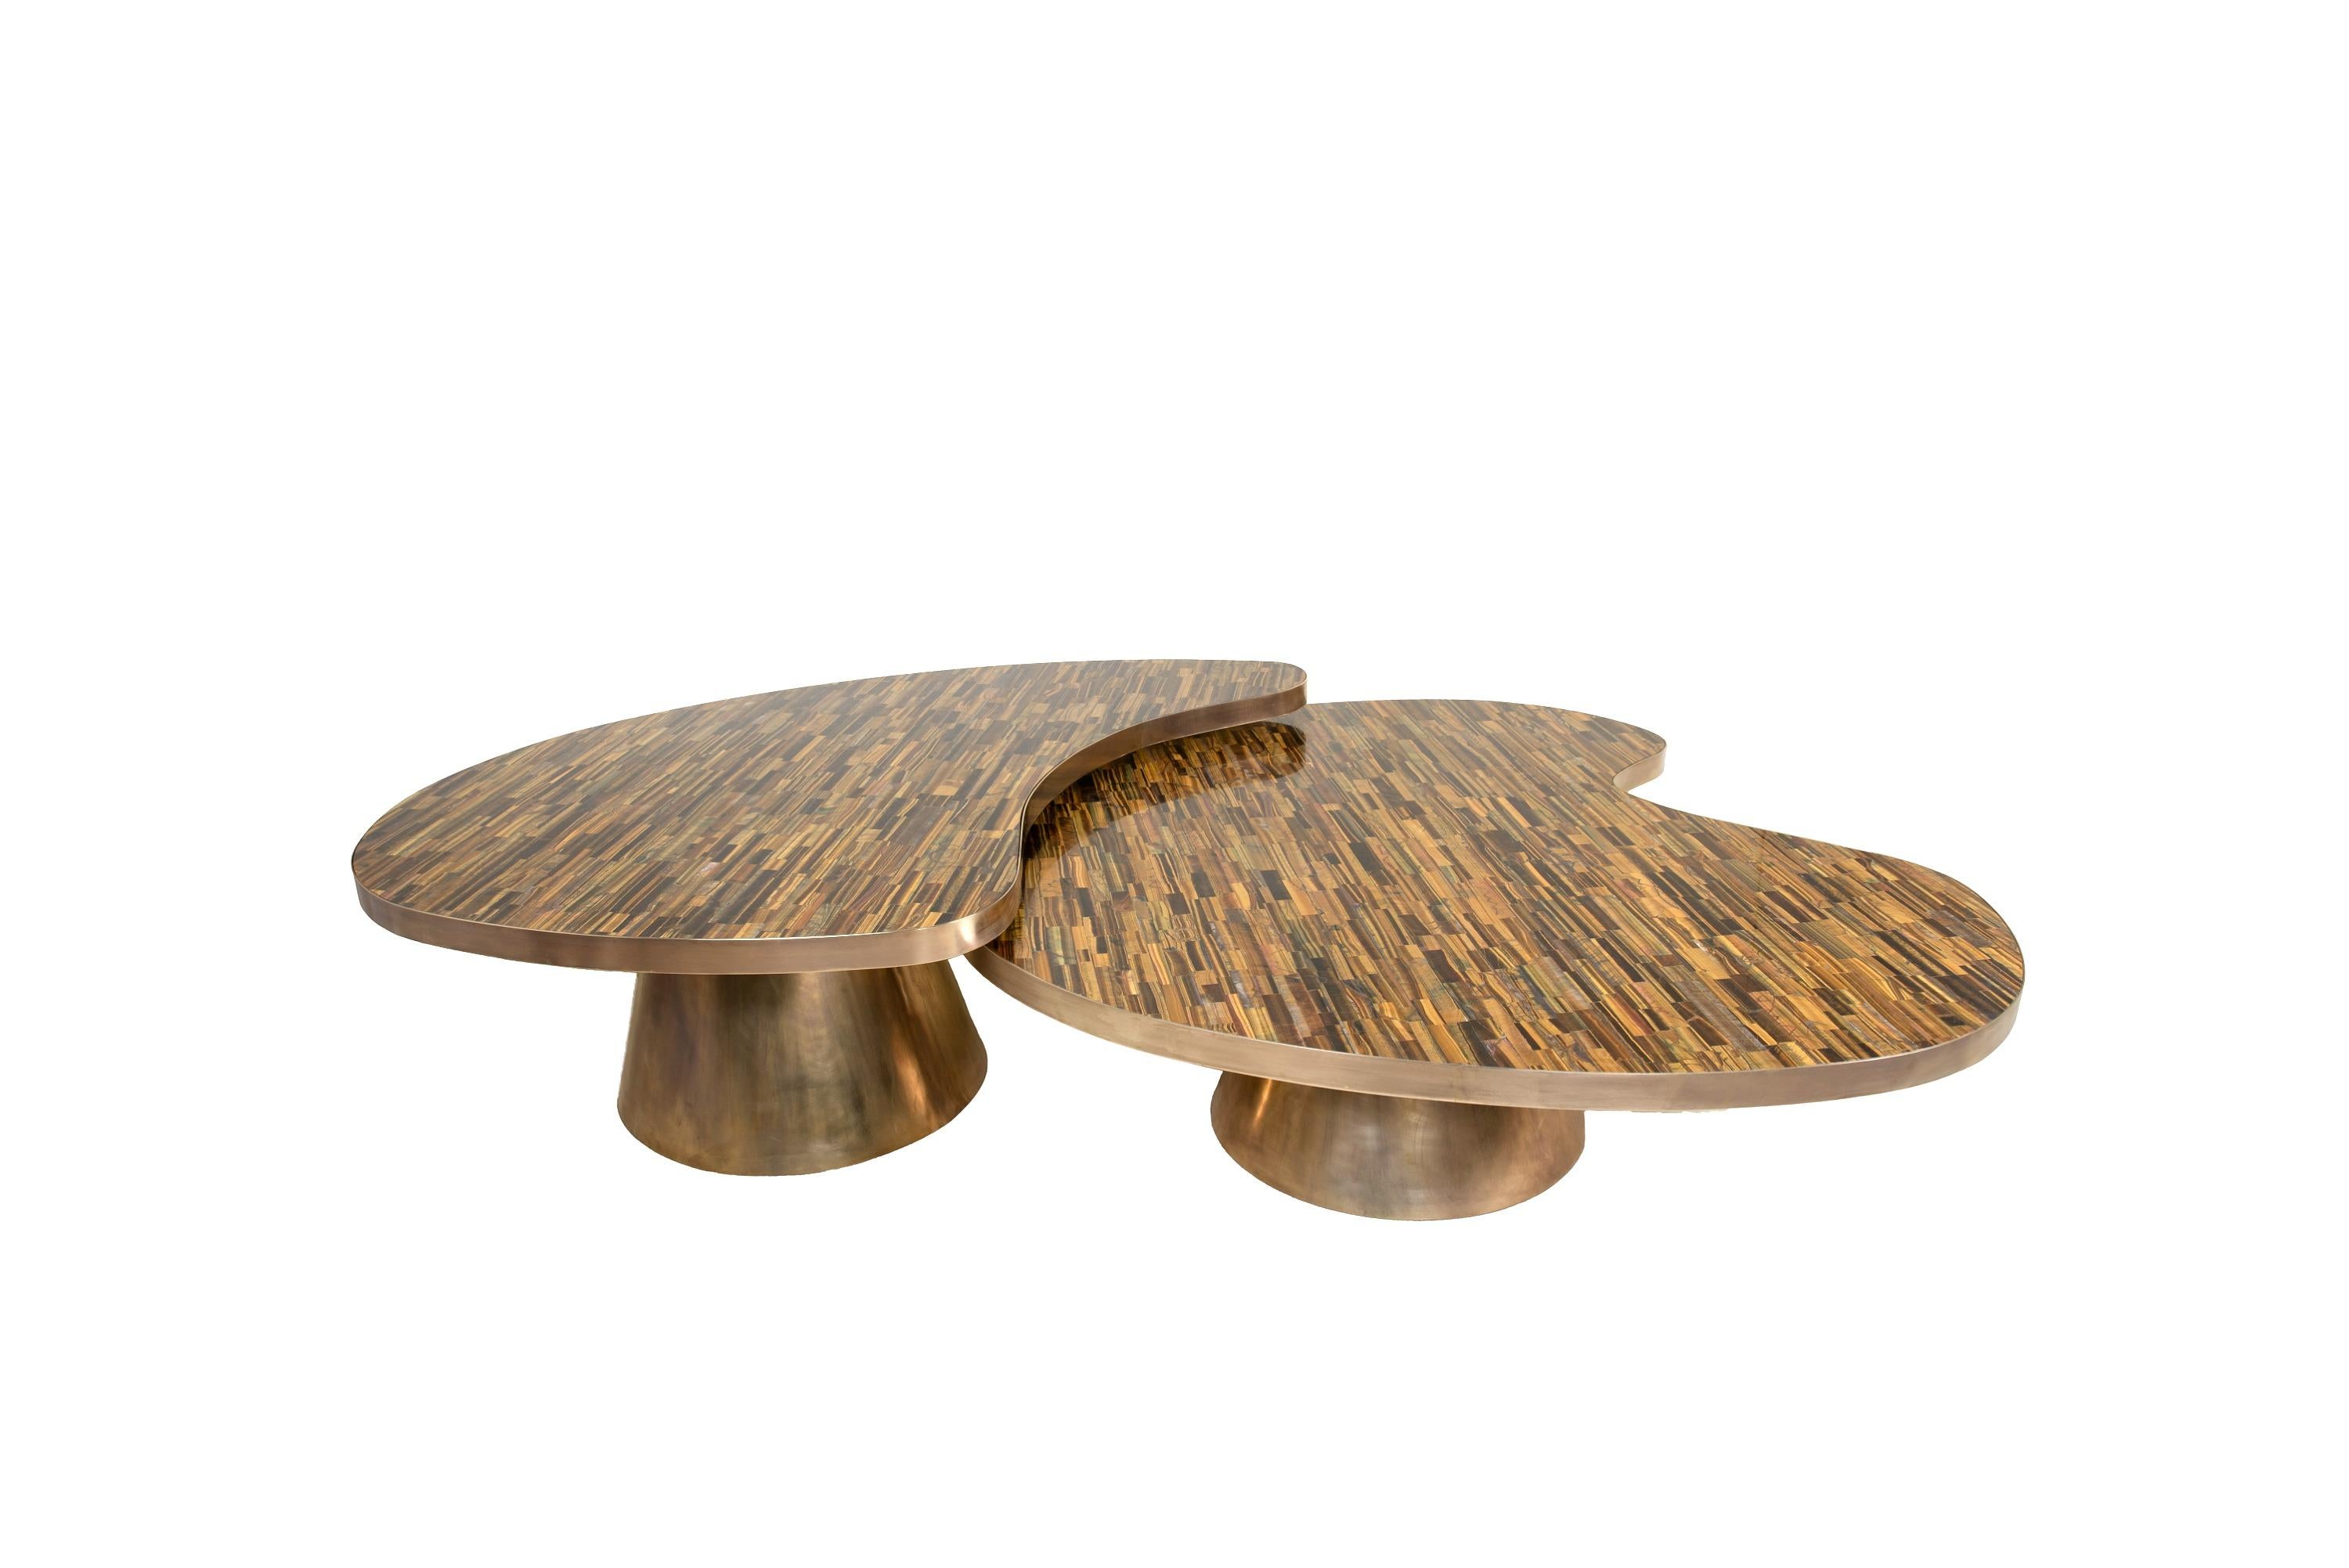 French 21st Century Coffee Table Kone Tiger Eye by Arriau Made in France